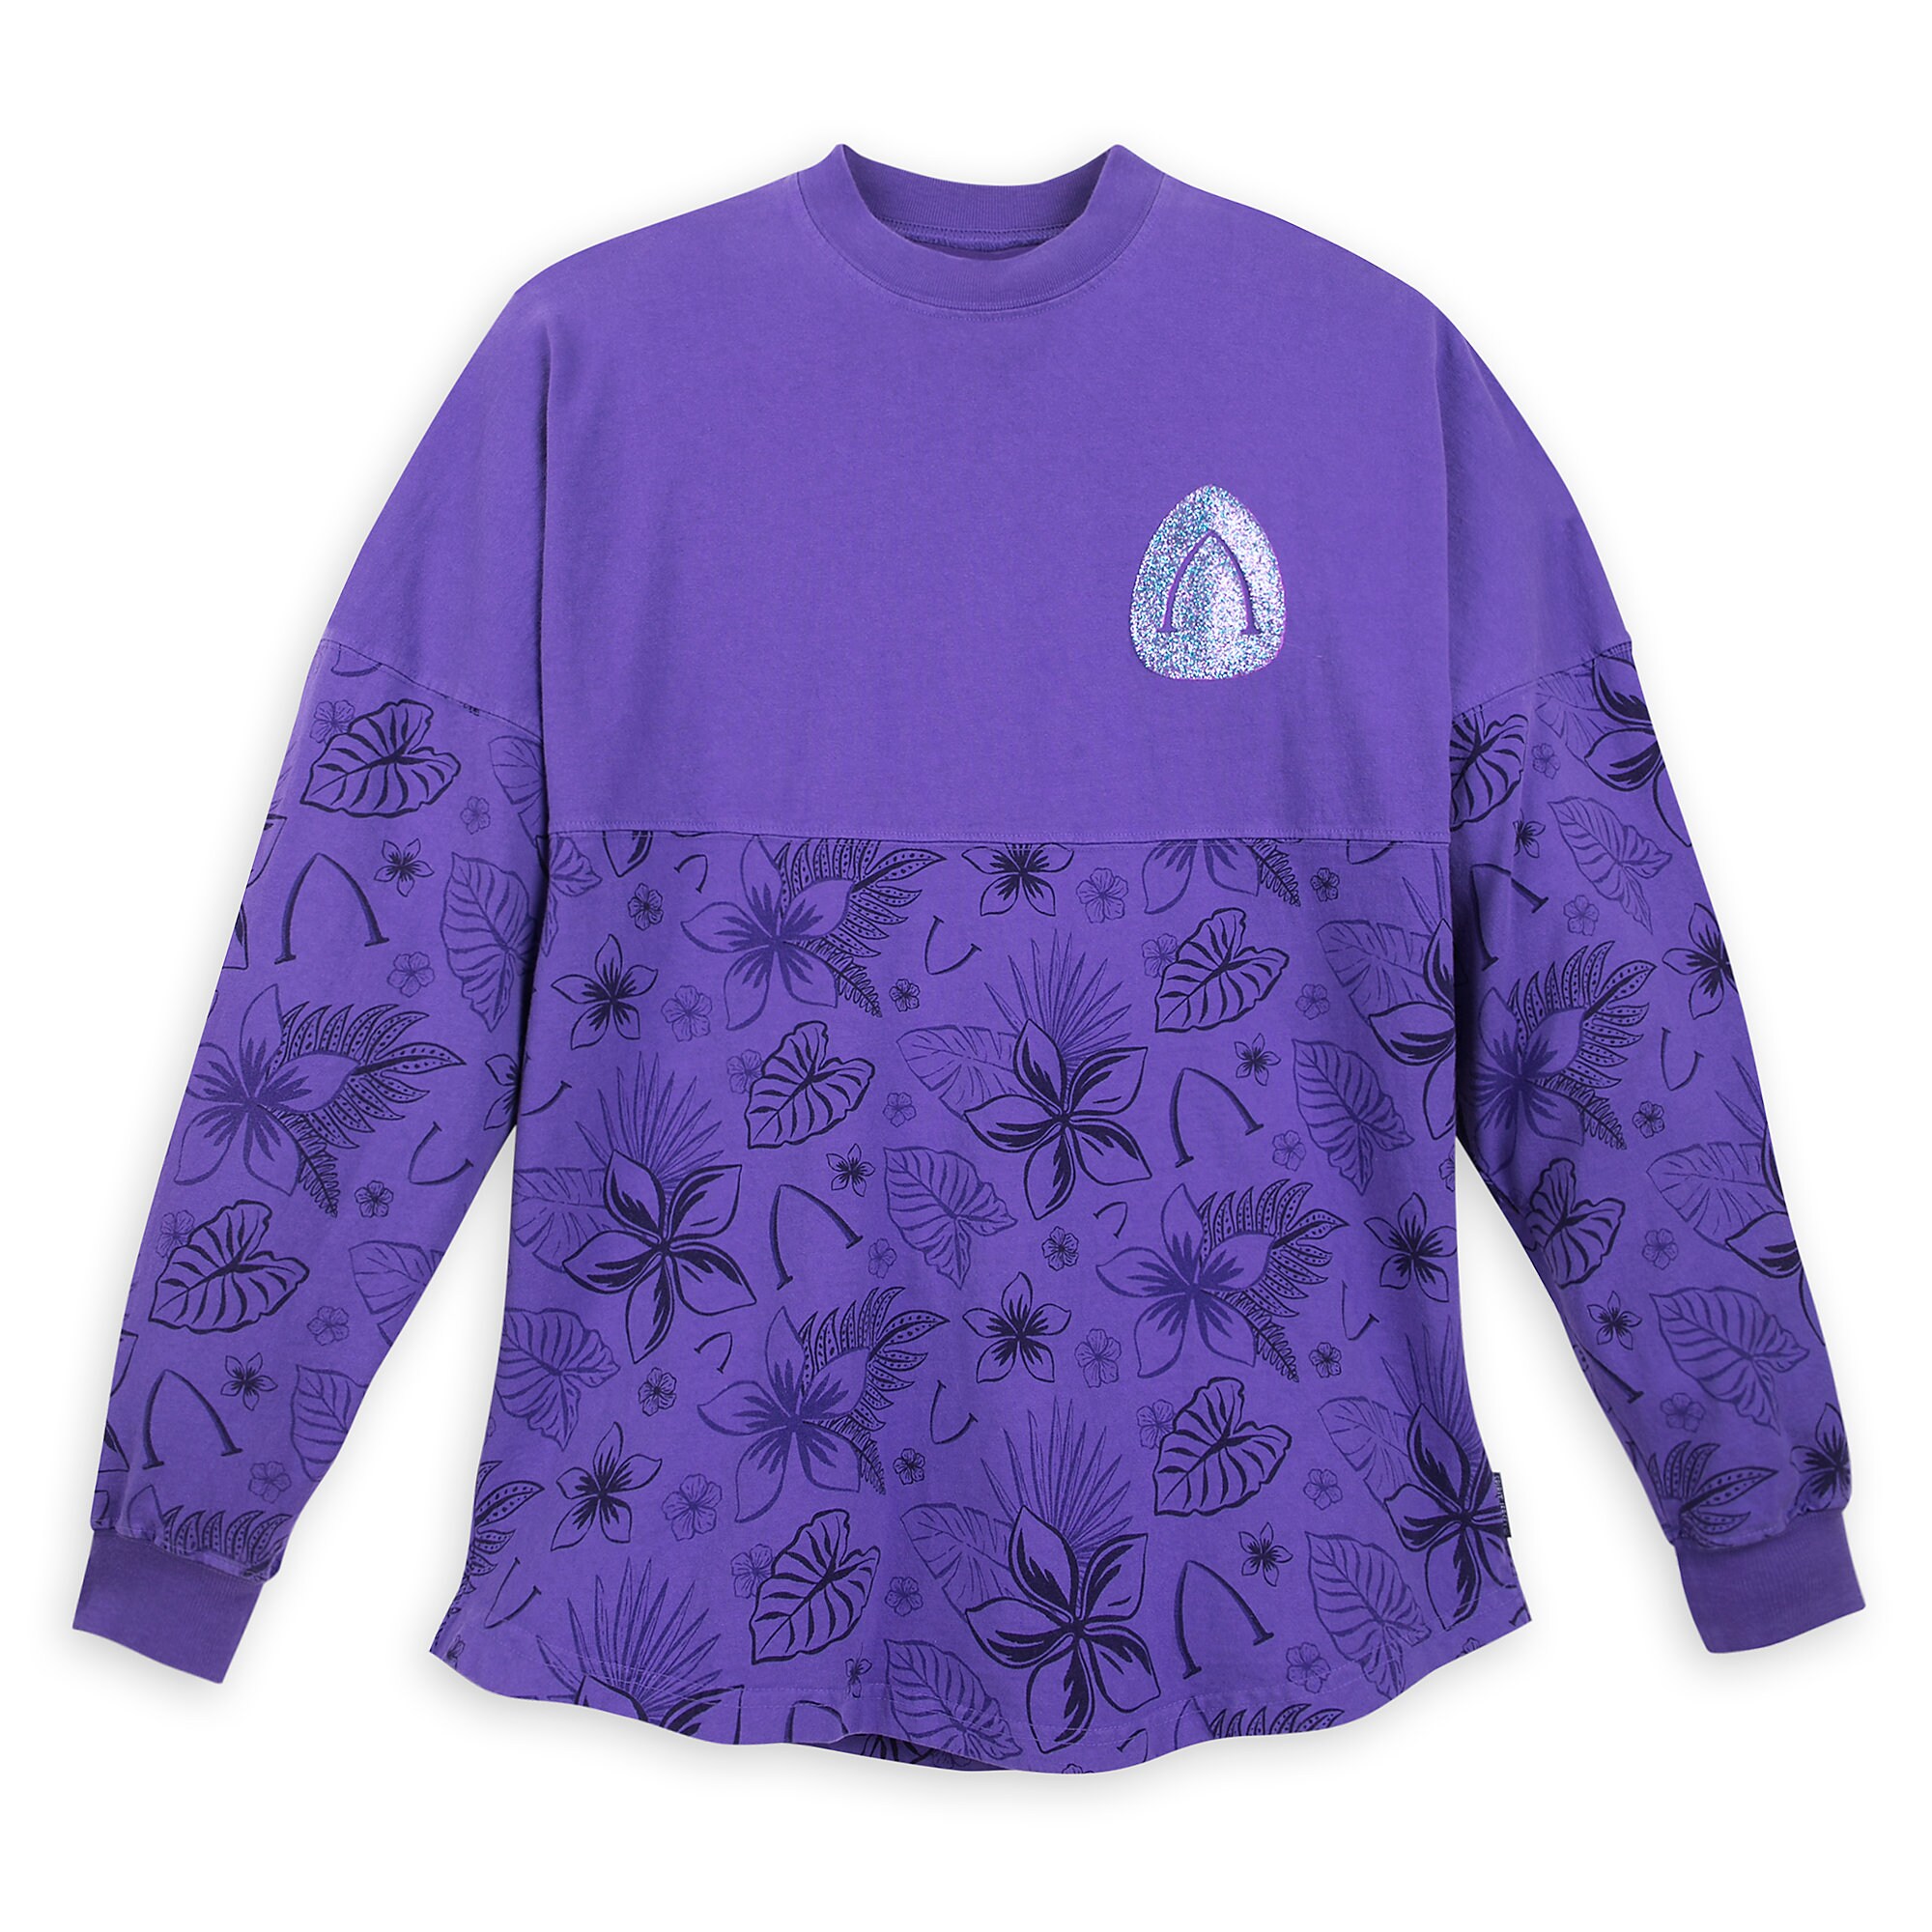 Aulani, A Disney Resort & Spa Spirit Jersey for Adults - Potion Purple is now available online